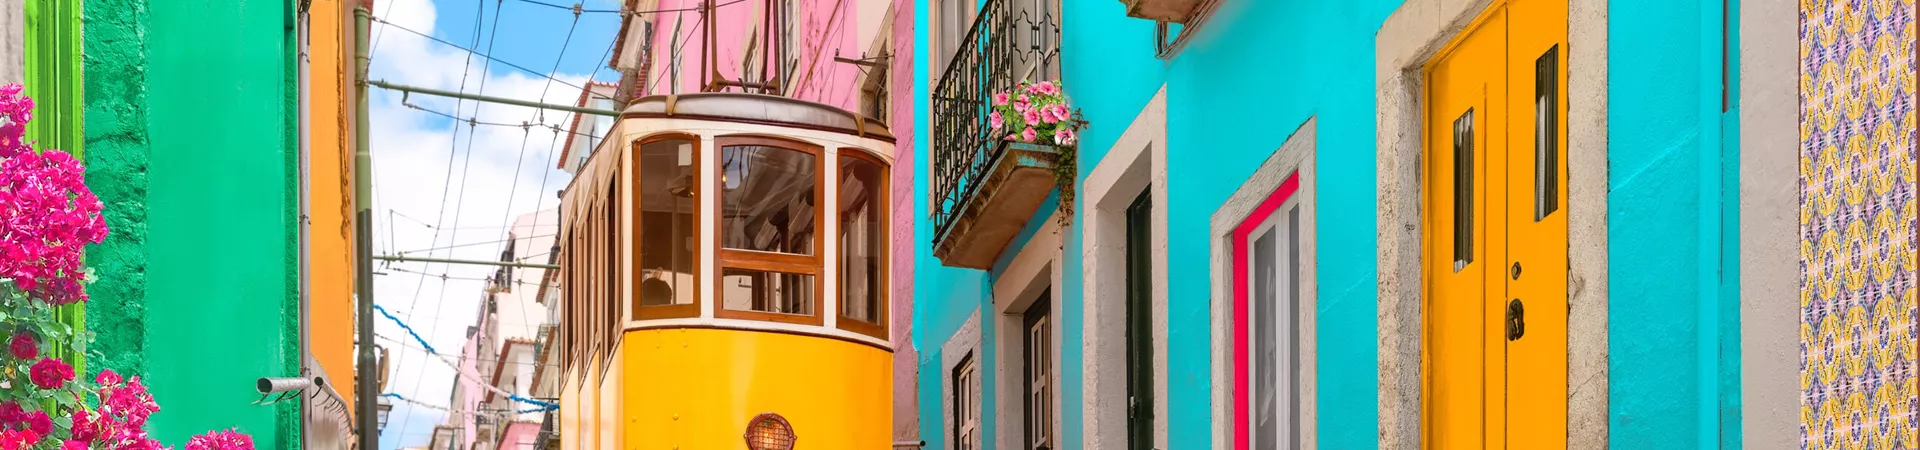 Yellow tram passing colourful houses in Lisbon, Portugal